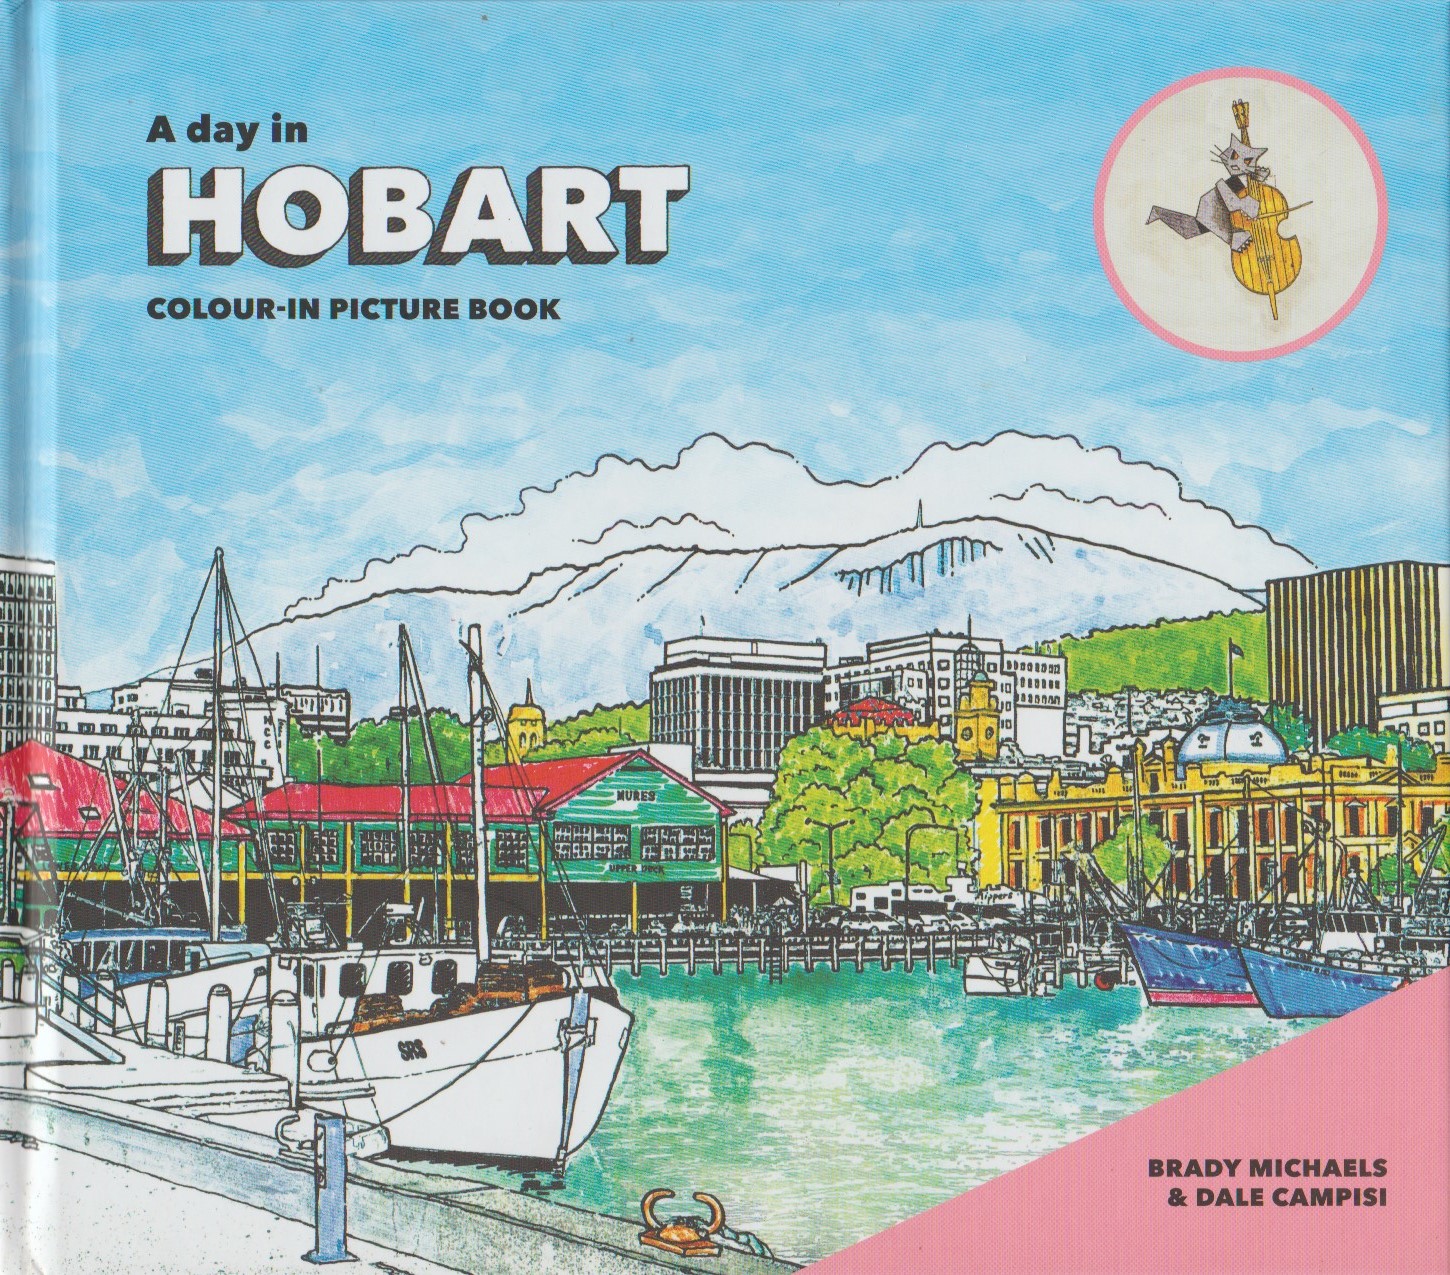 A Day in Hobart Colour-in Picture Book